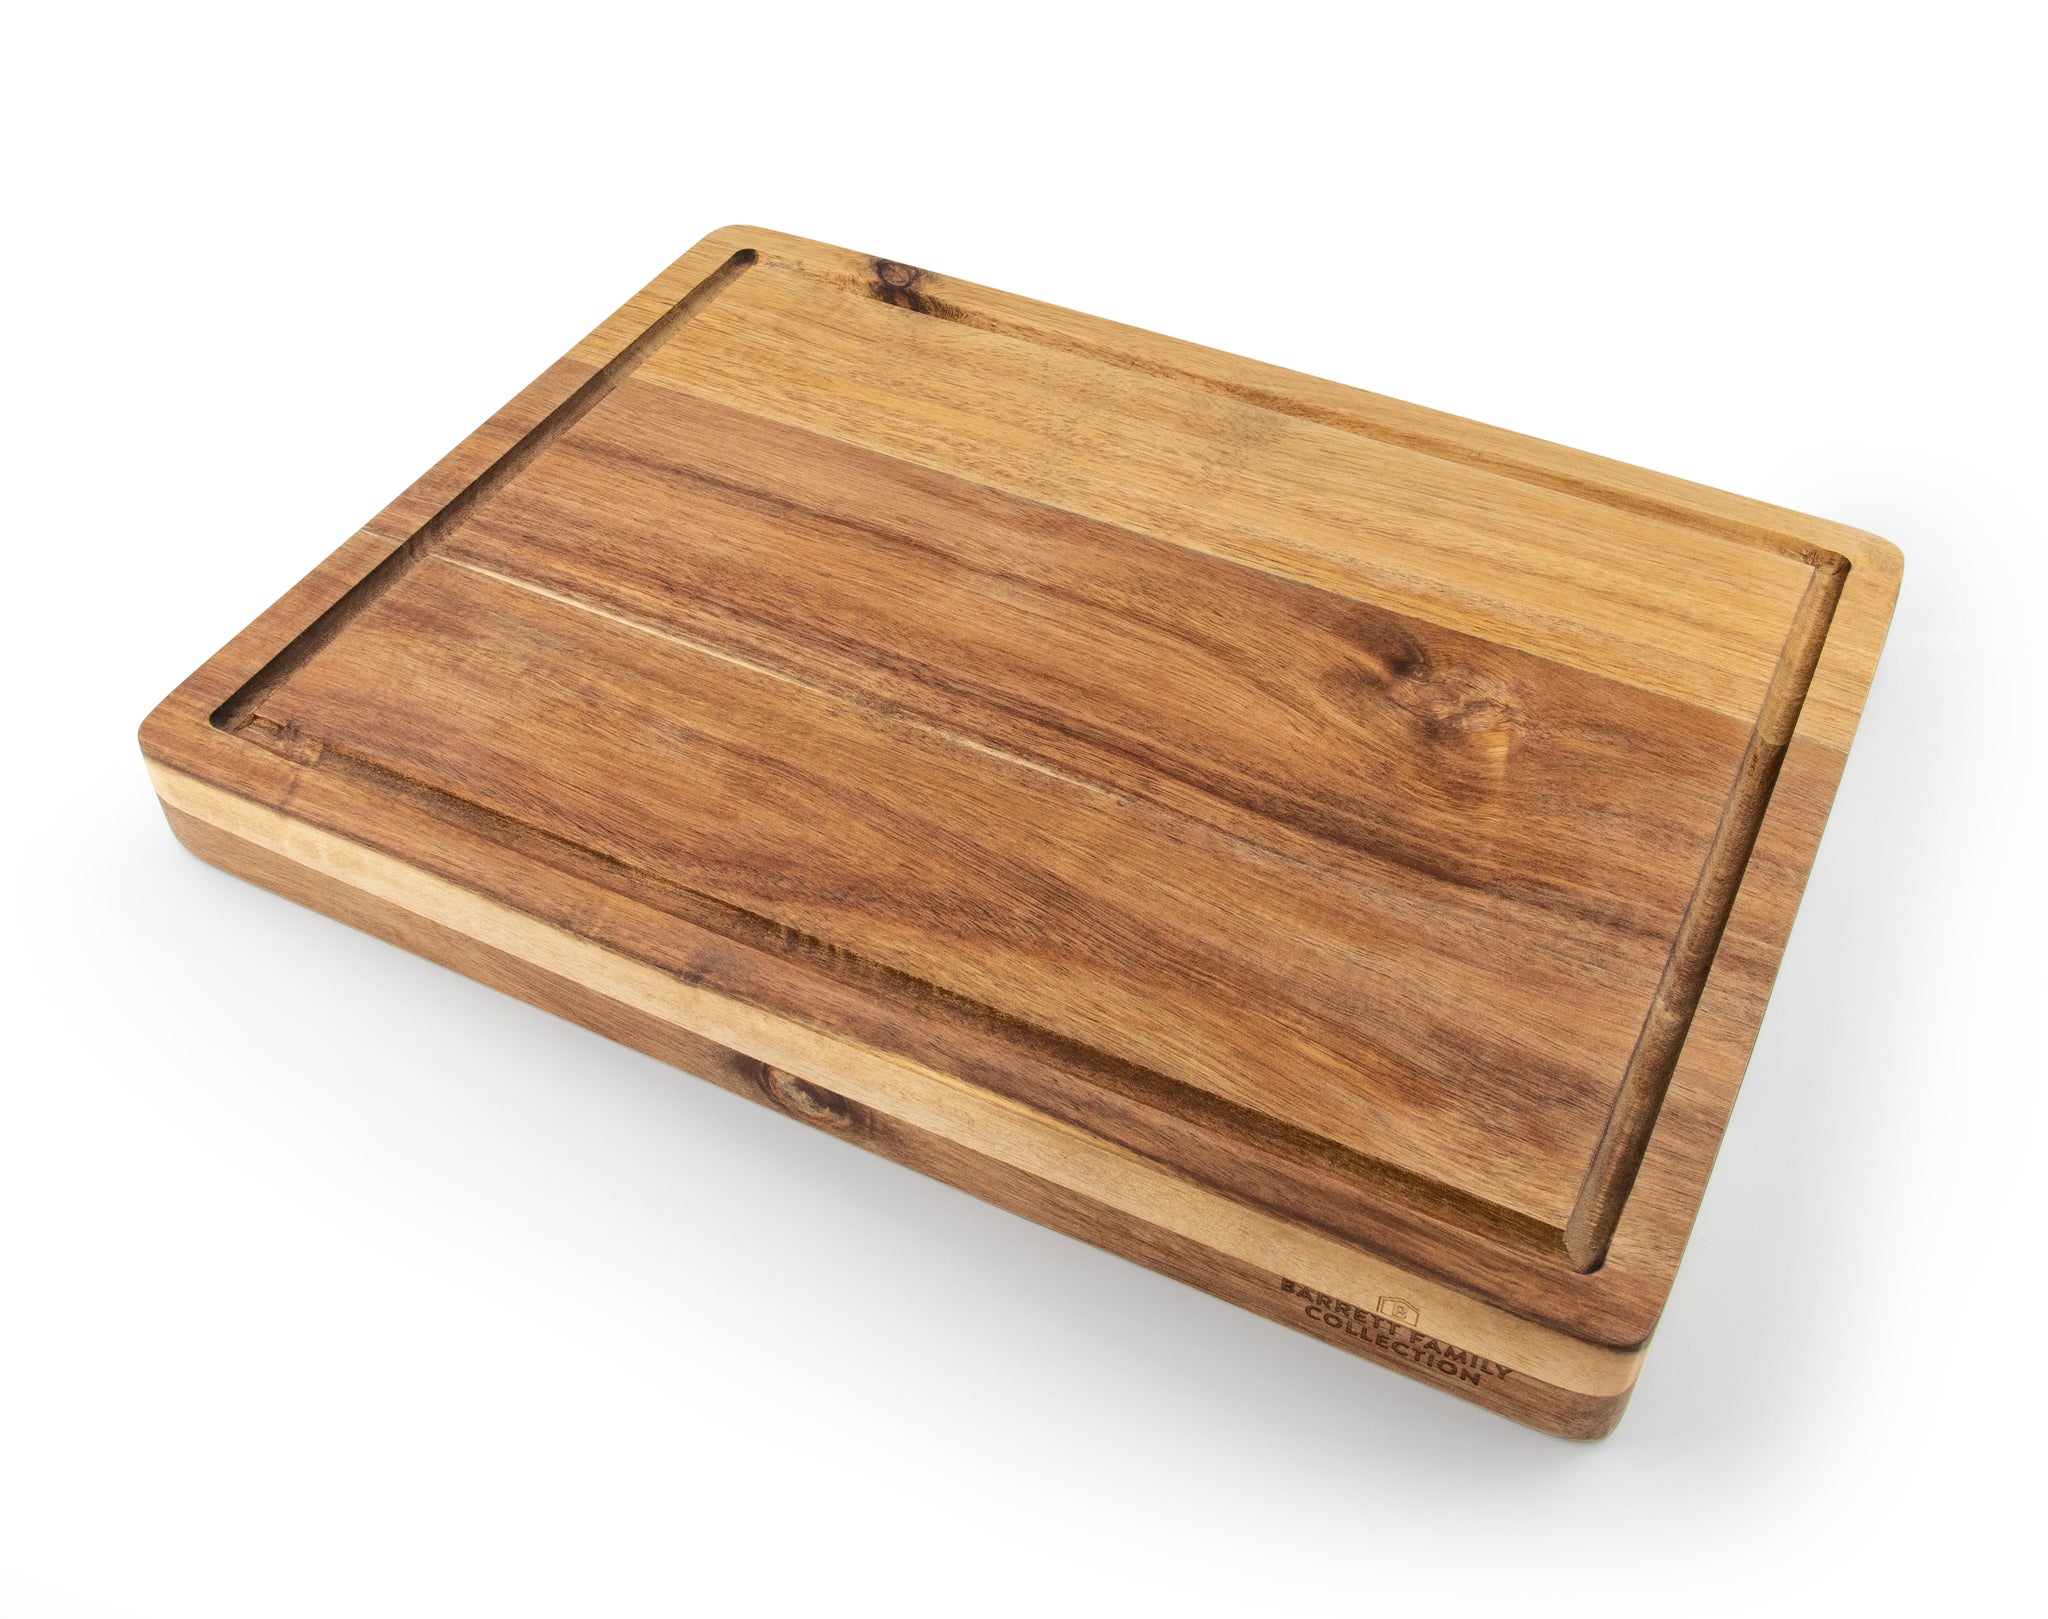  Large Wood Cutting Board with Handle 17 x 13 Simple